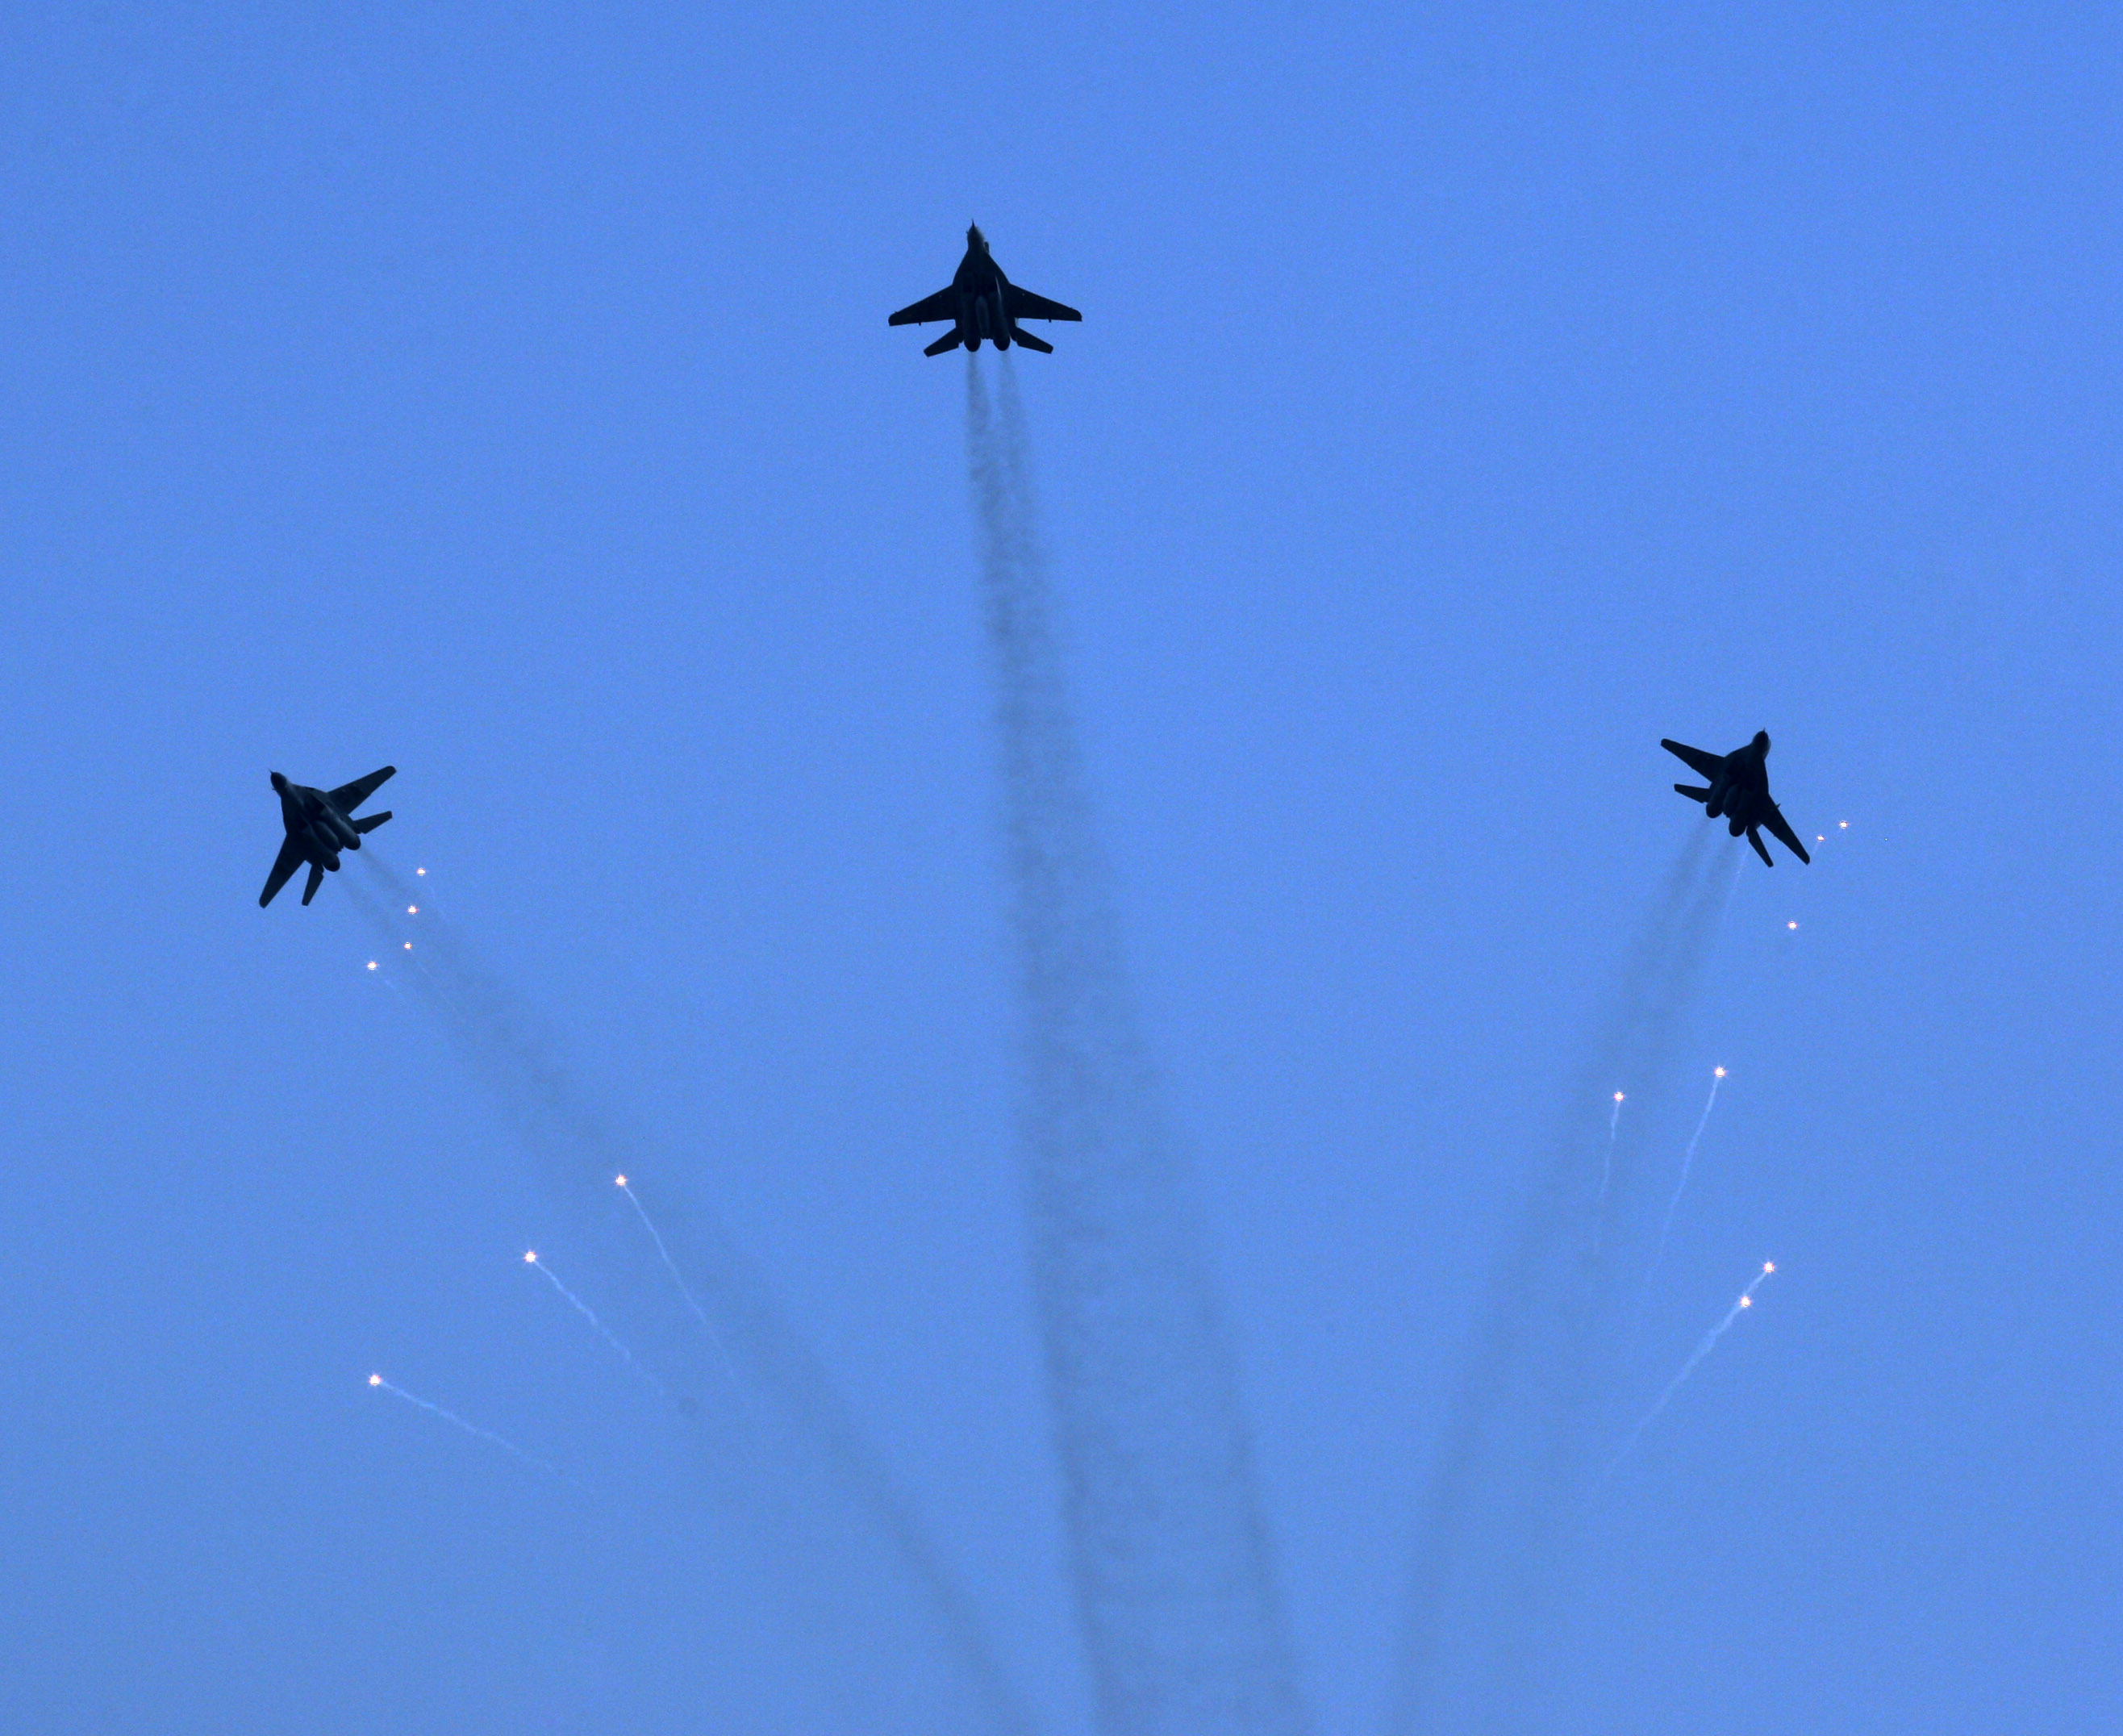 Glimpses-of-Indian-Air-Force-Day-2014-PHOTO-4.jpg